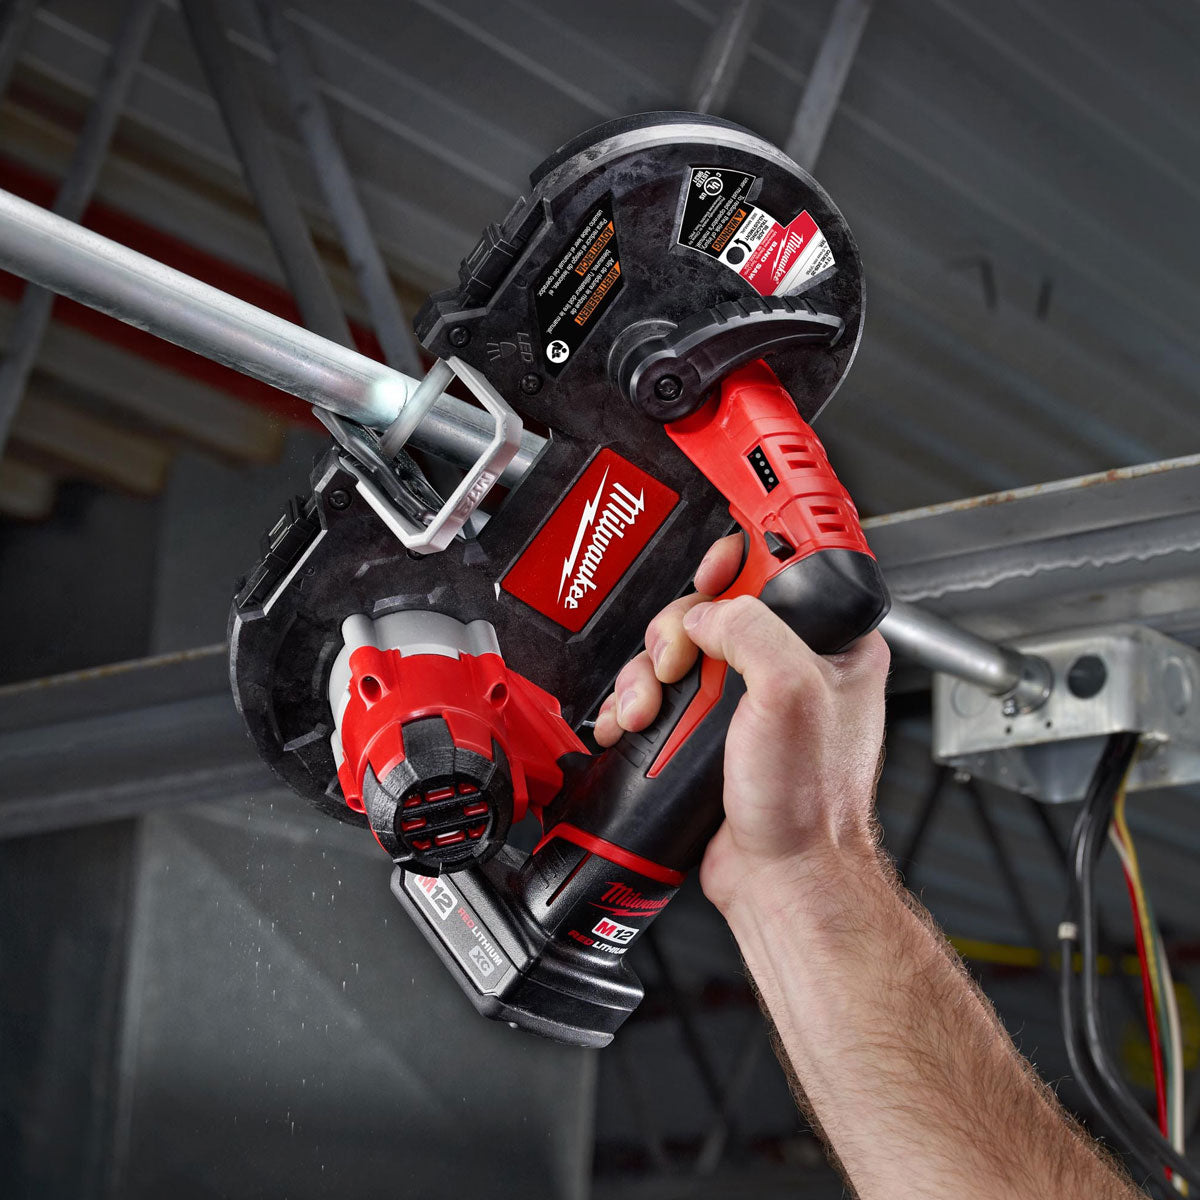 Milwaukee M12BS-0 12V Sub Compact Bandsaw with 2 x 4.0Ah Batteries & Charger